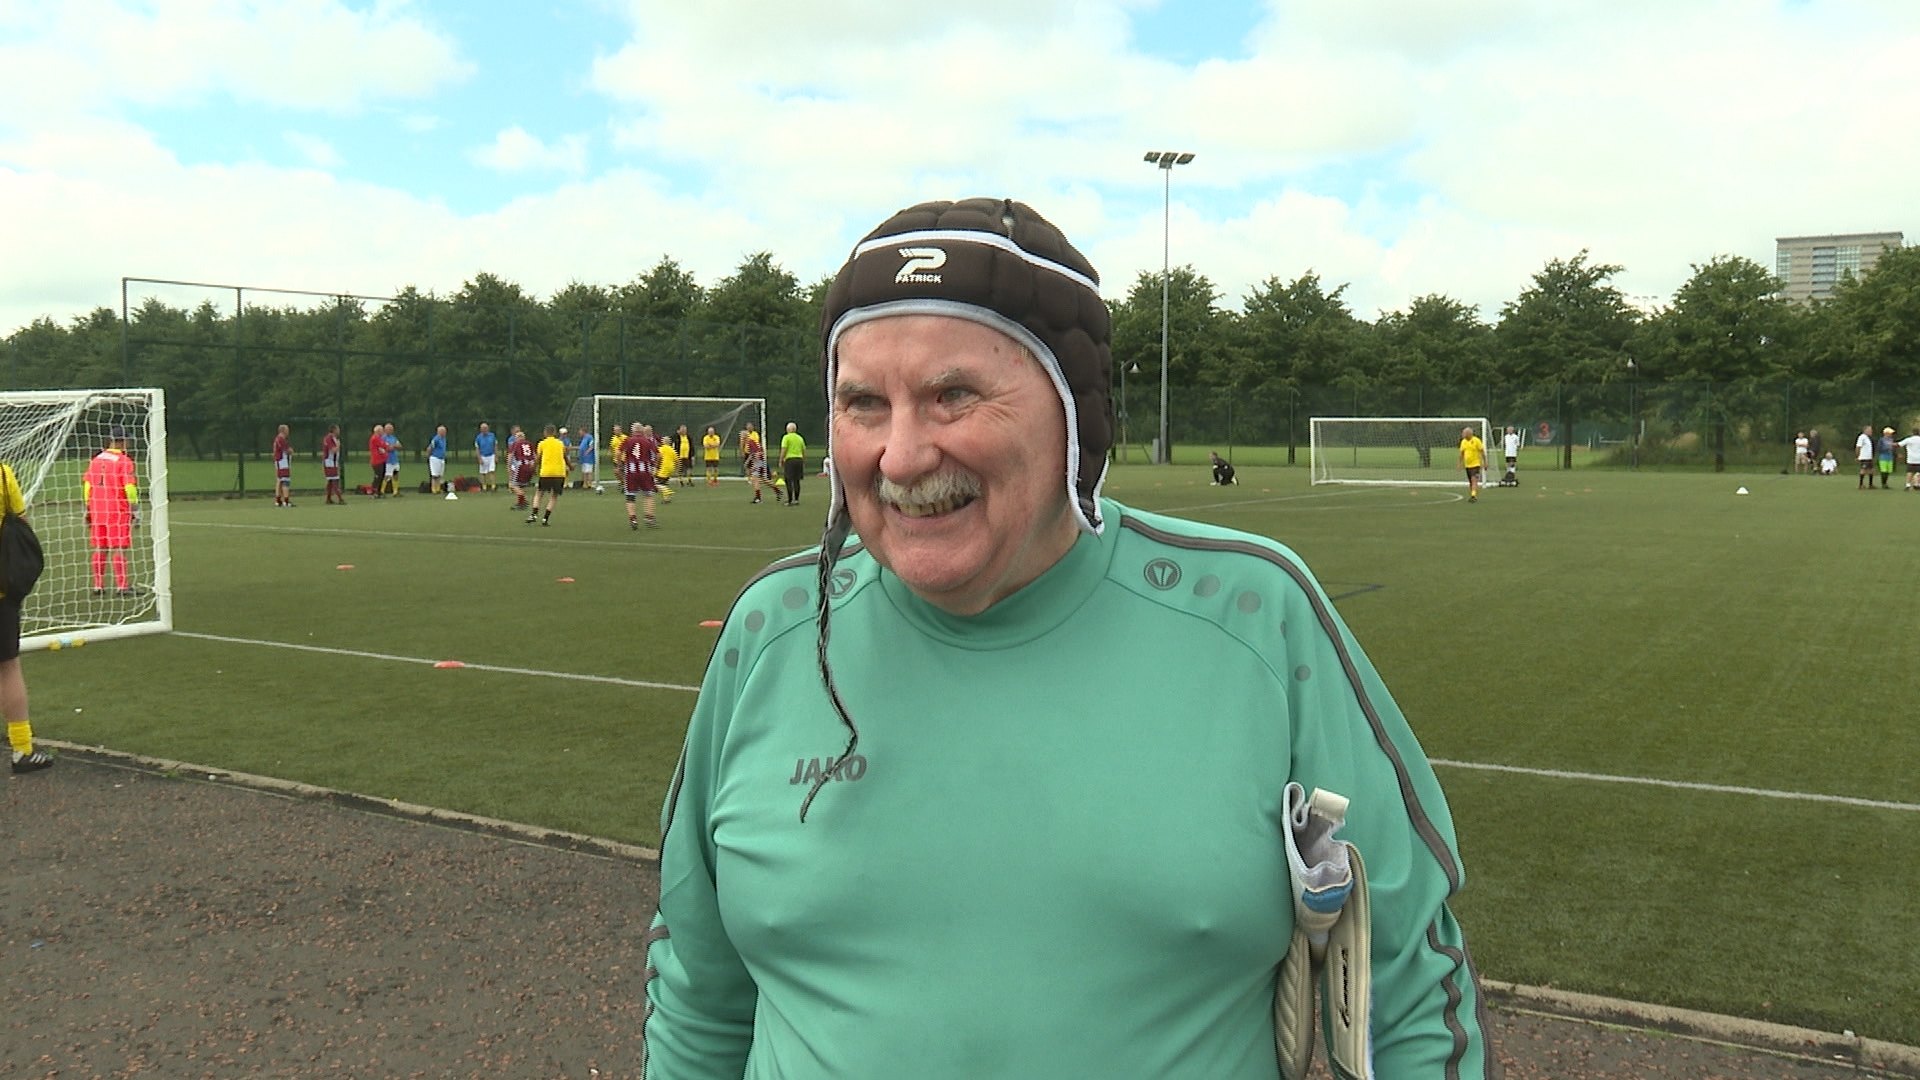 John McNiven, who plays for Stenhousemuir, says walking football has benefited his mental and physical health